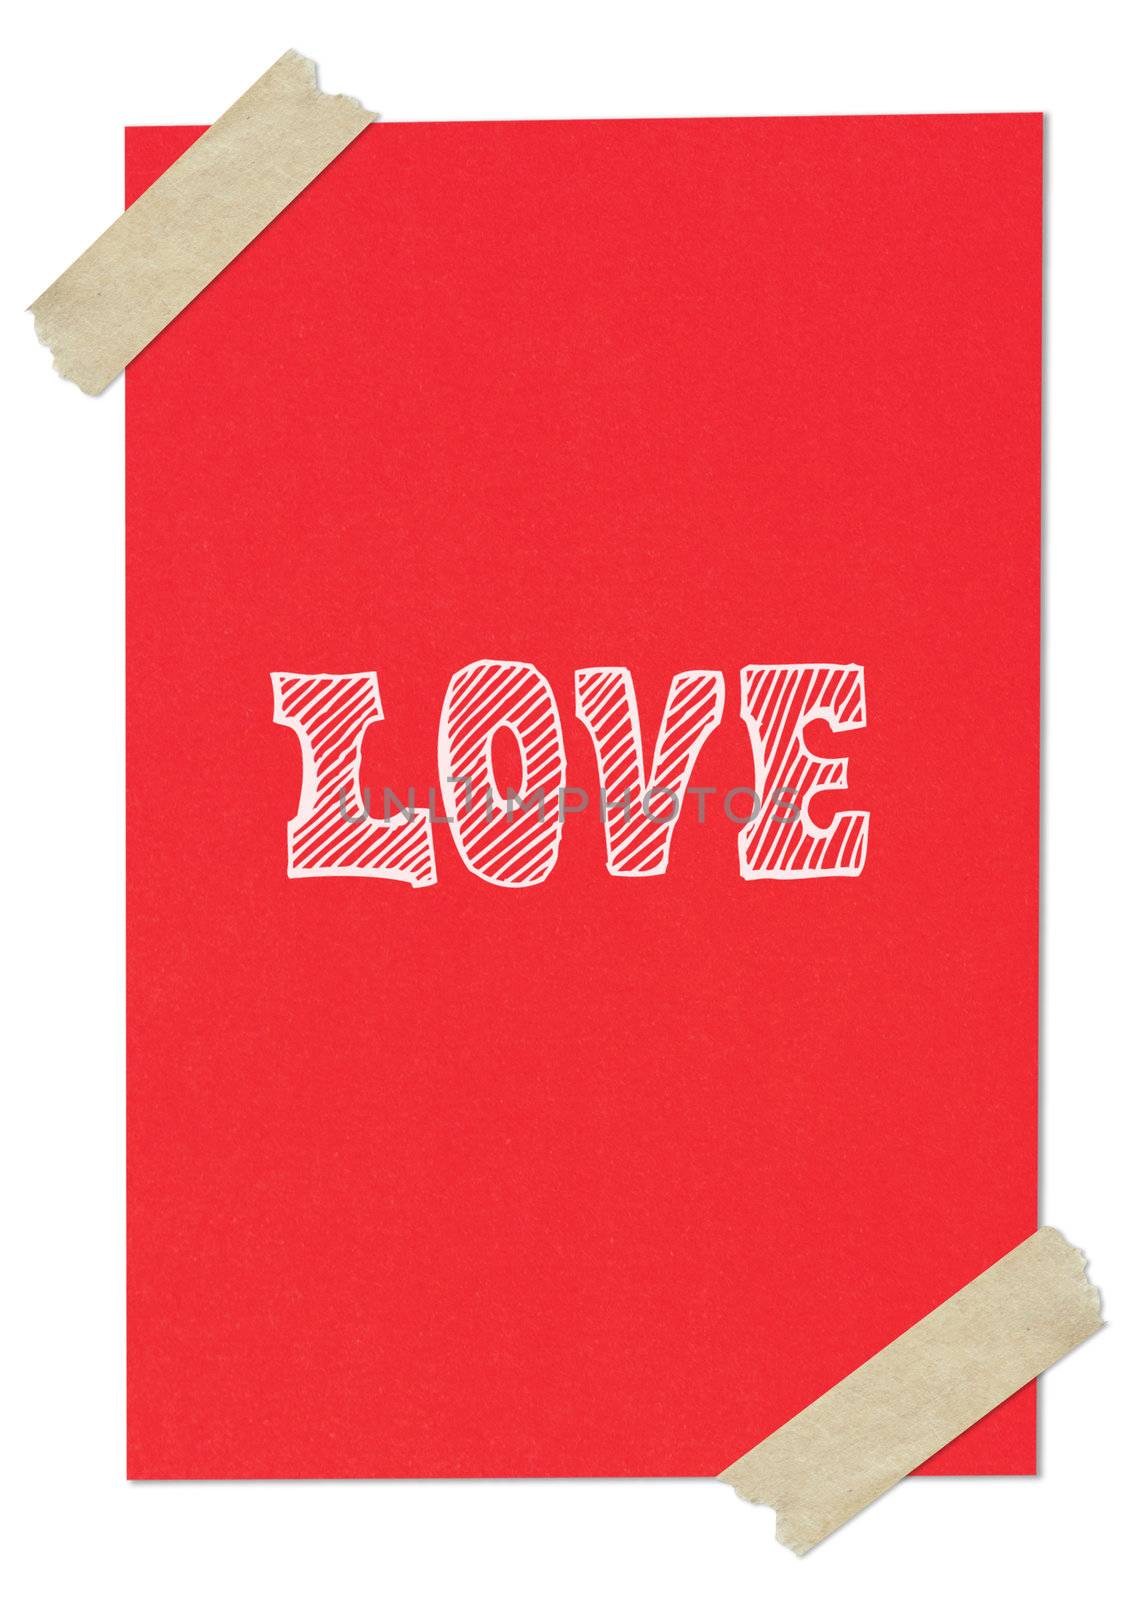 Handwriting love word on red paper with tape by nuchylee